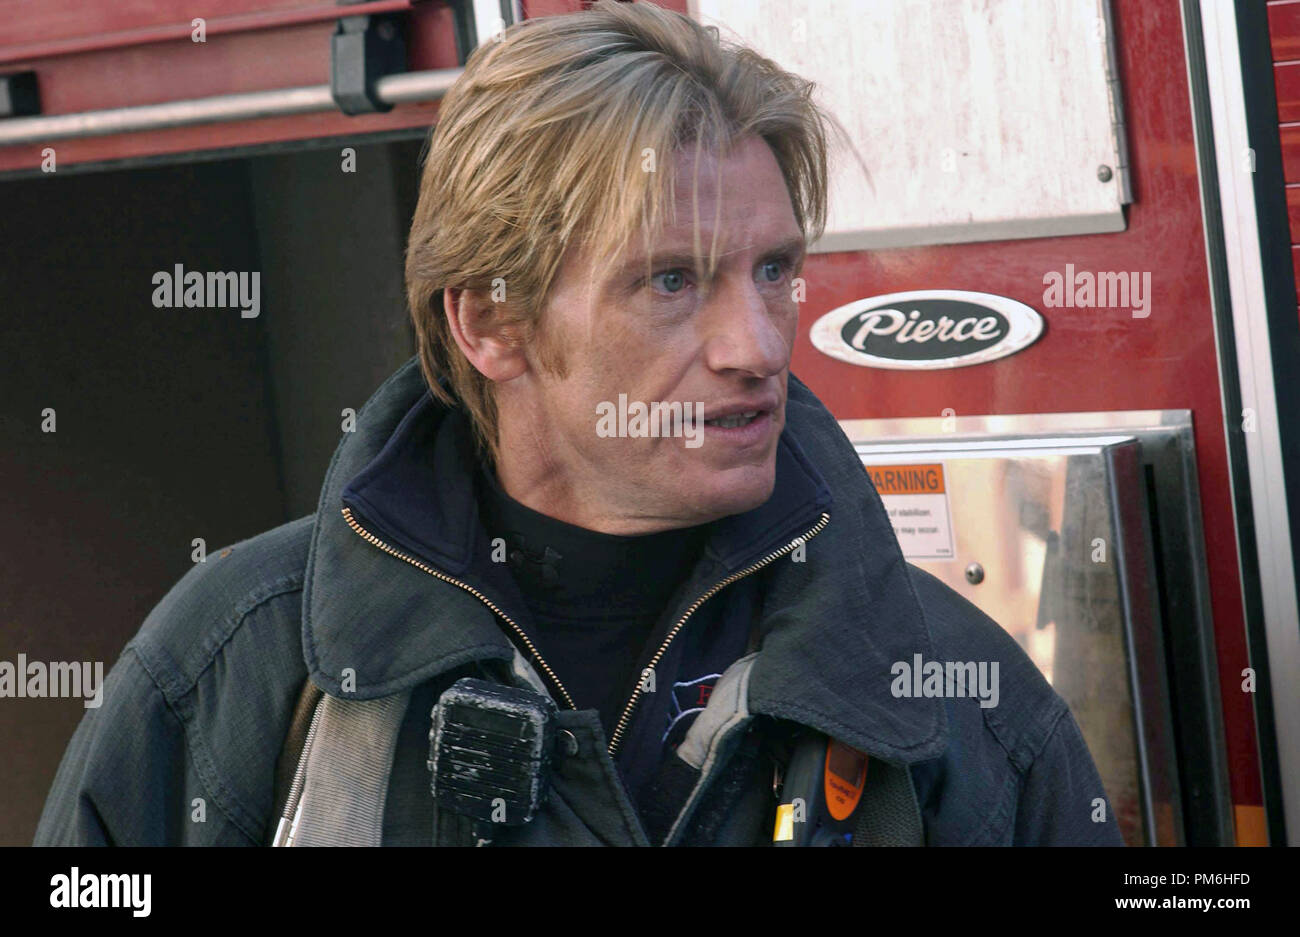 Film Still / Publicity Still from Rescue Me Denis Leary 2005 Photo  Credit: Craig Blankenhorn File Reference # 30736454THA For Editorial Use  Only - All Rights Reserved Stock Photo - Alamy